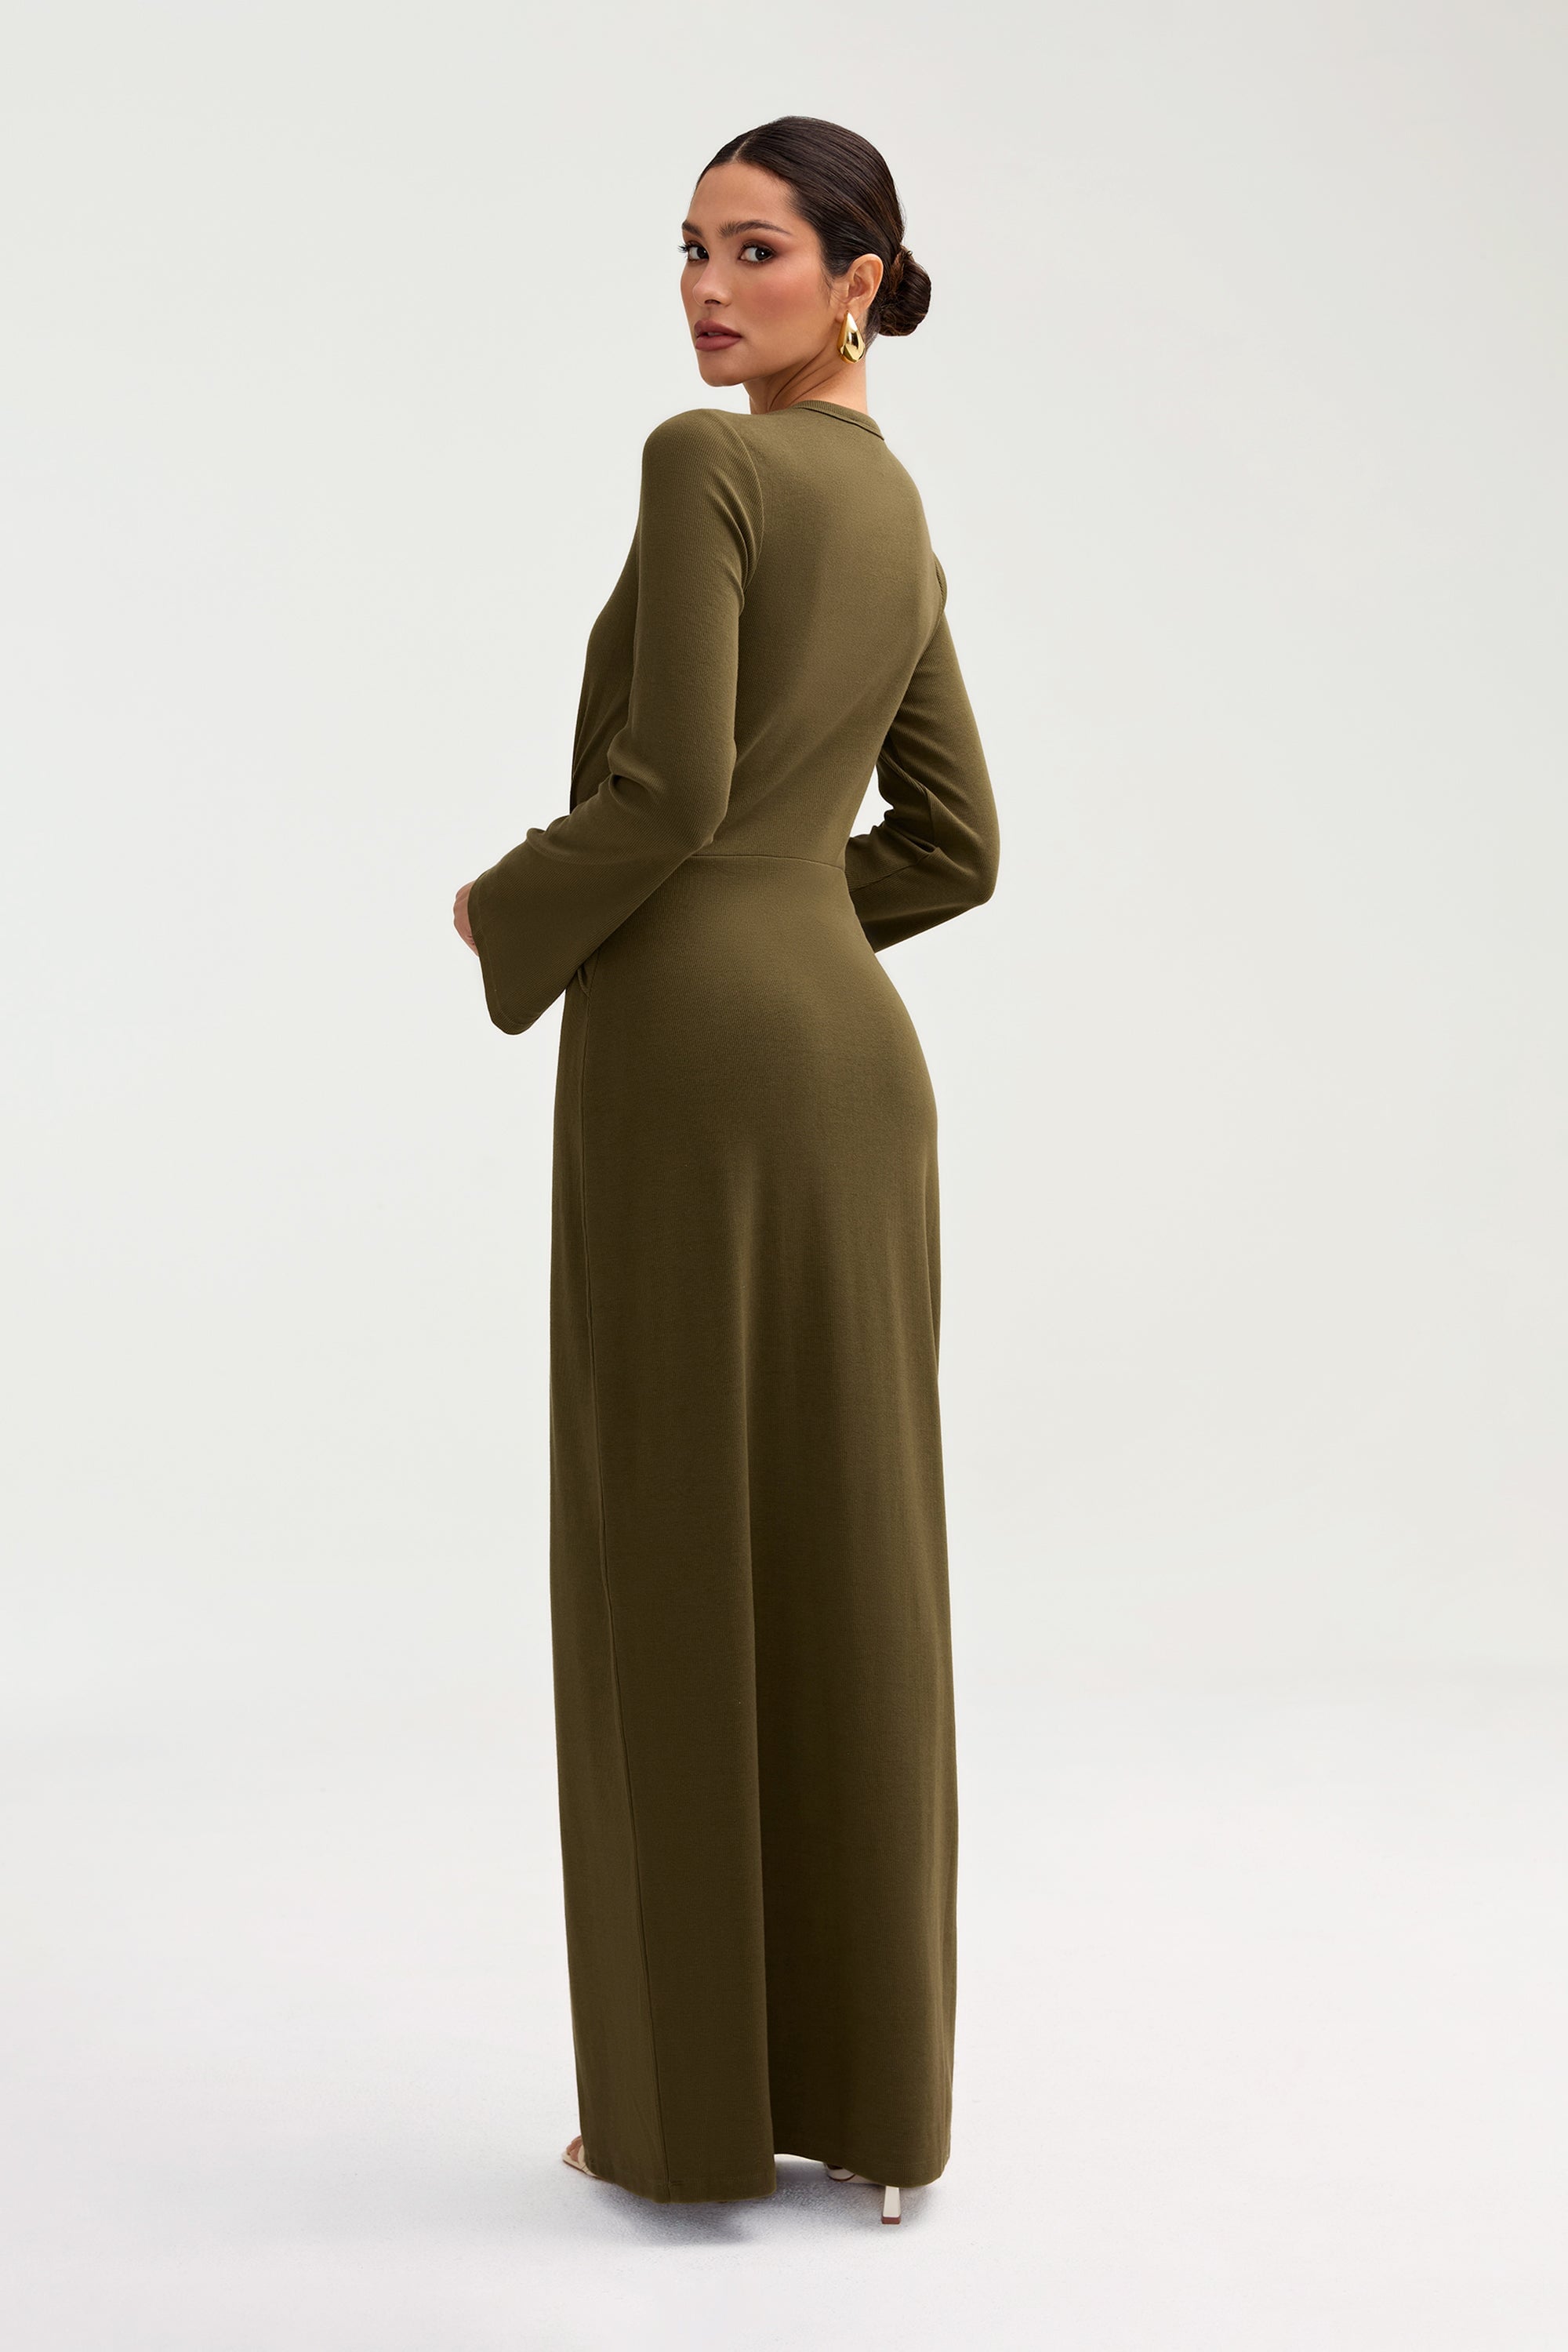 Aissia Ribbed Twist Front Maxi Dress - Olive Night Clothing epschoolboard 